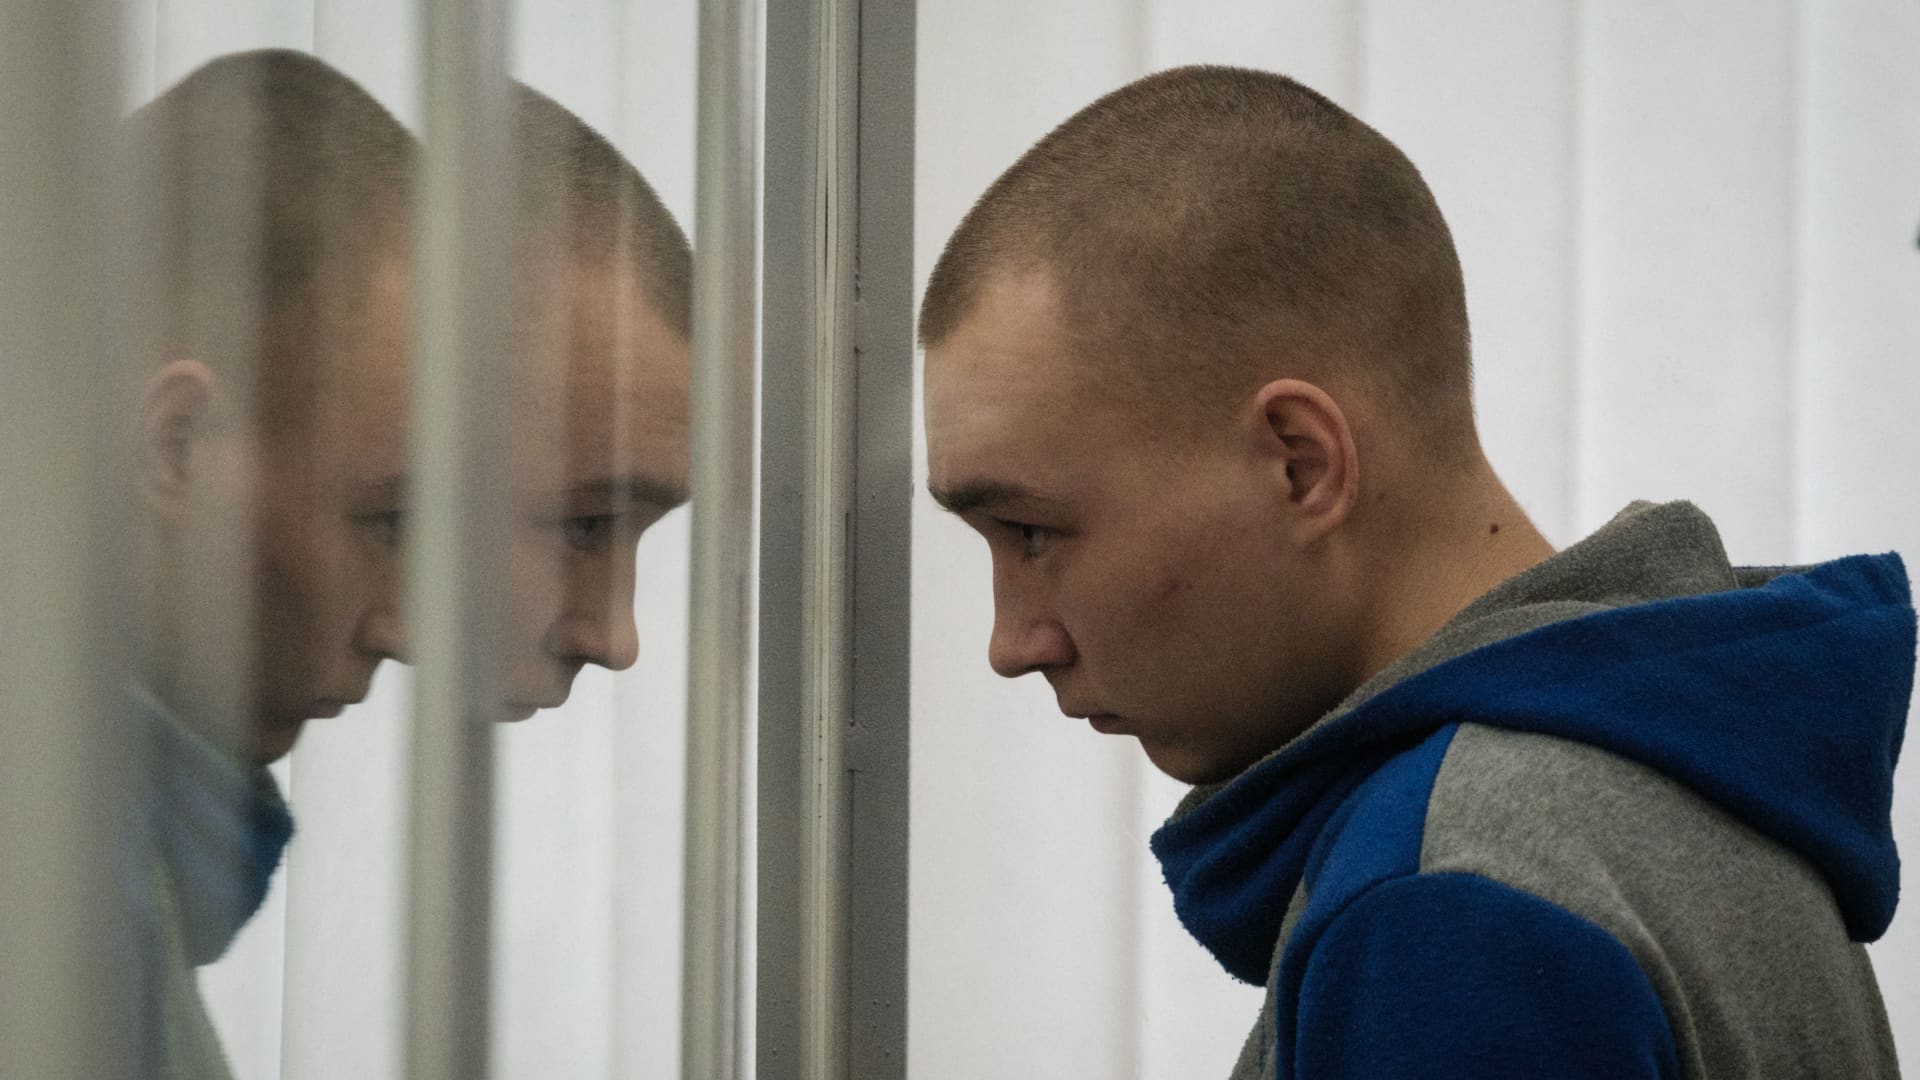 Russian Sergeant Vadim Shishimarin stands and listens translator's words in the defendant's box during his trial on charges of war crimes for having killed a civilian at the Court of Appeal in Kyiv, on May 20, 2022.